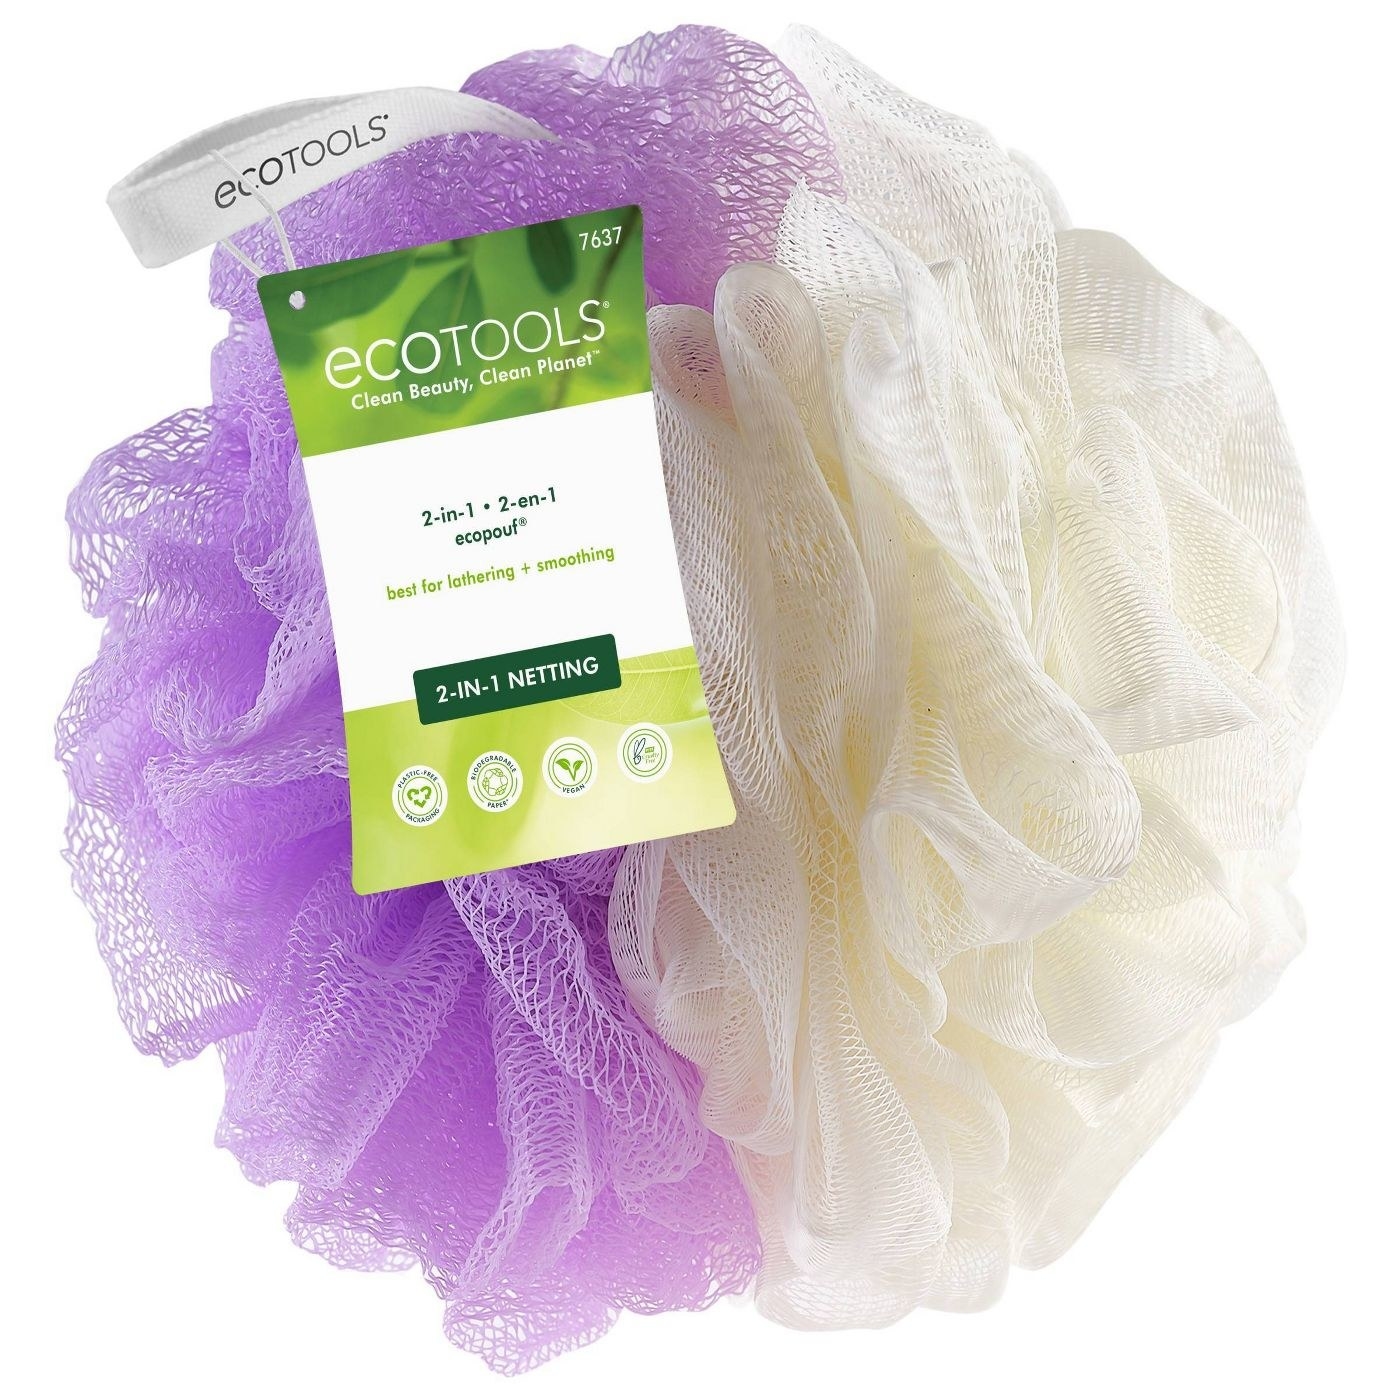 An image of a purple and cream shower pouf